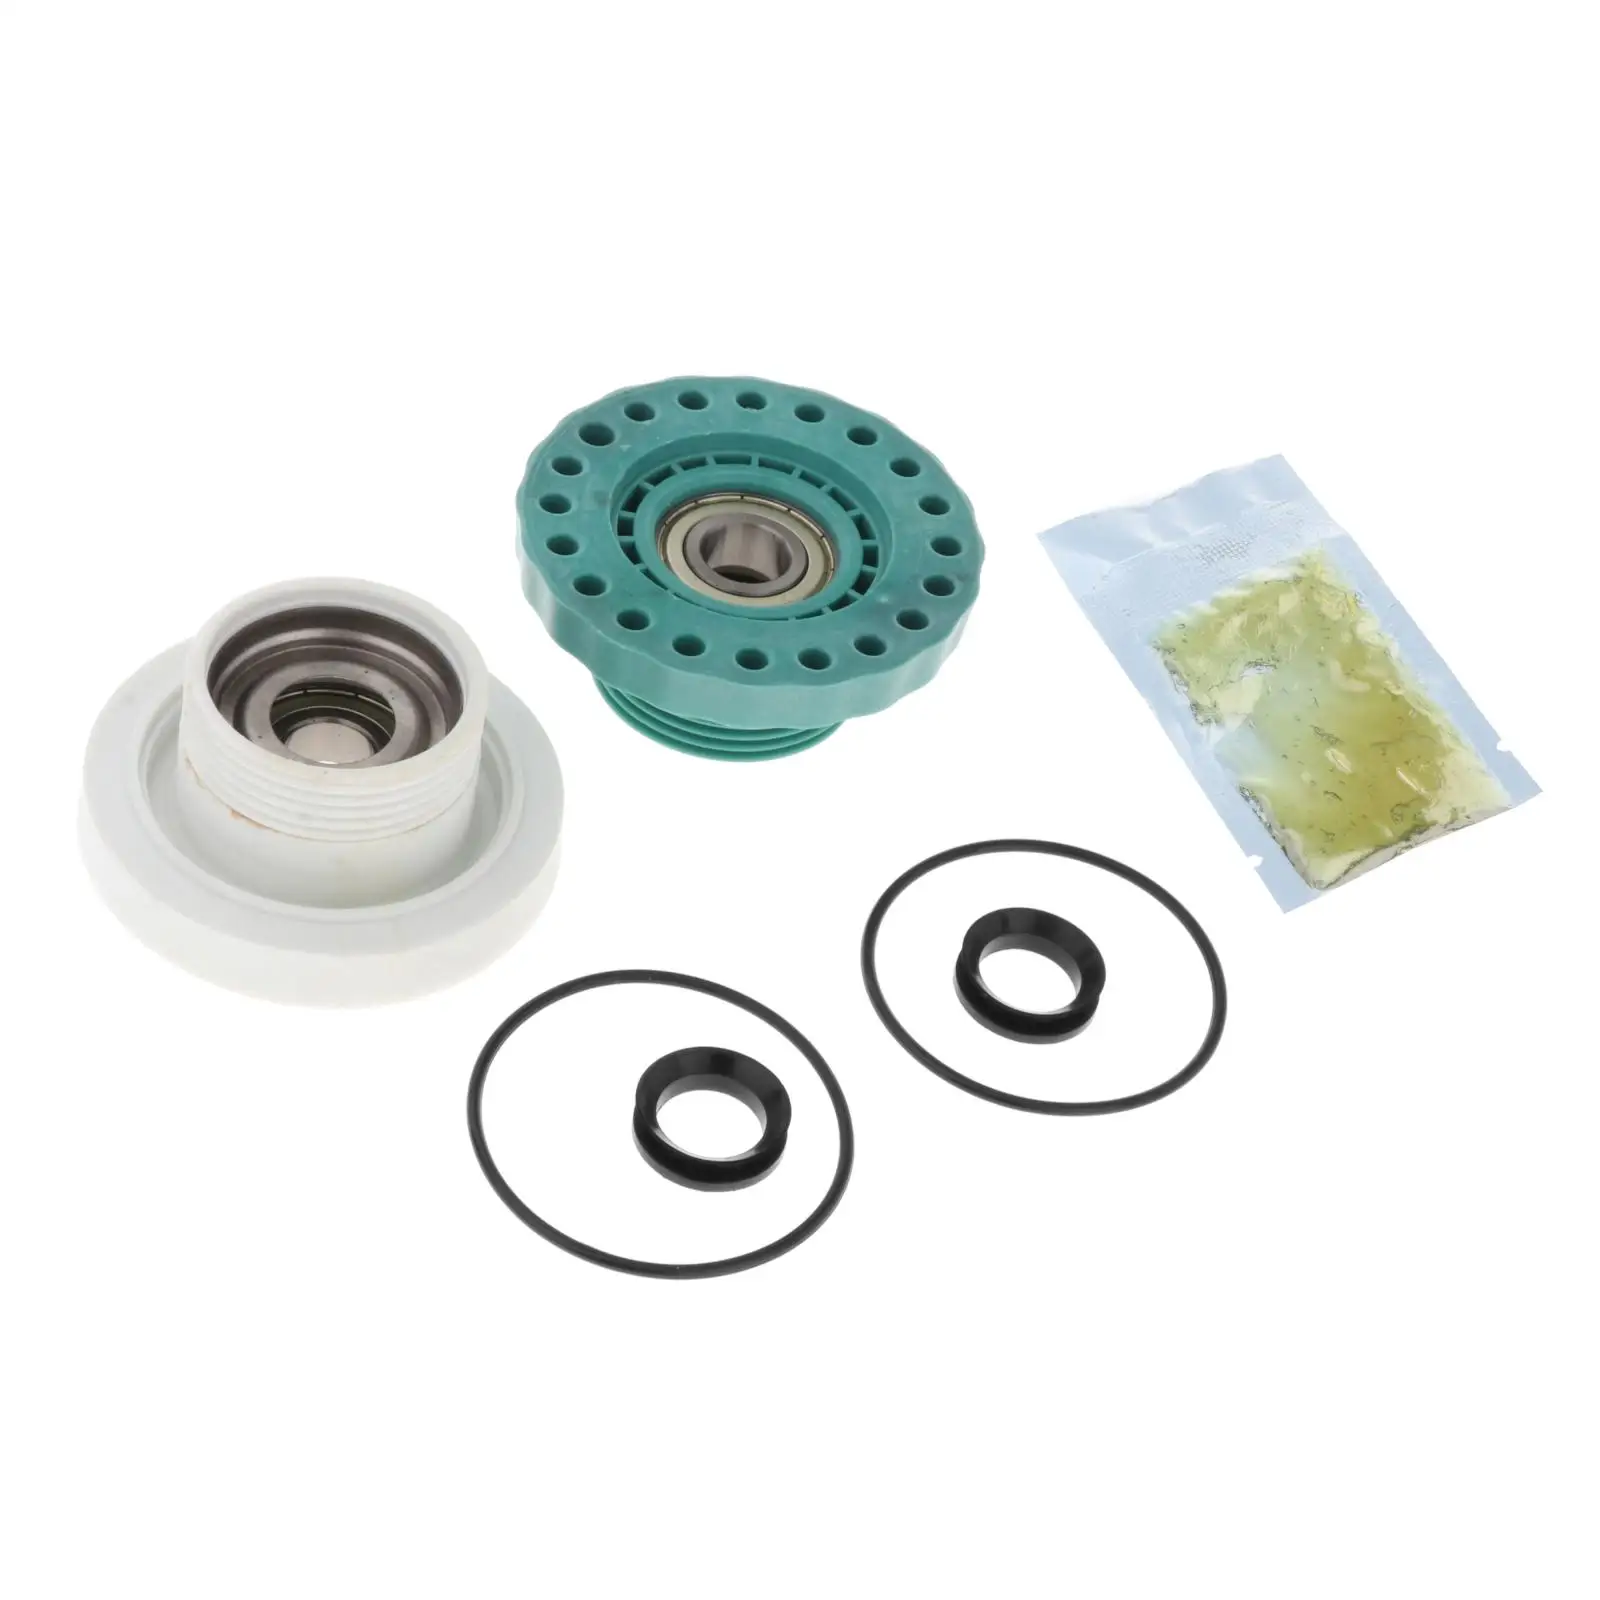 4071430963 Bearing Top Loader for AEG Washing Machine Washer Dryer 4071430971 Washer Accessories